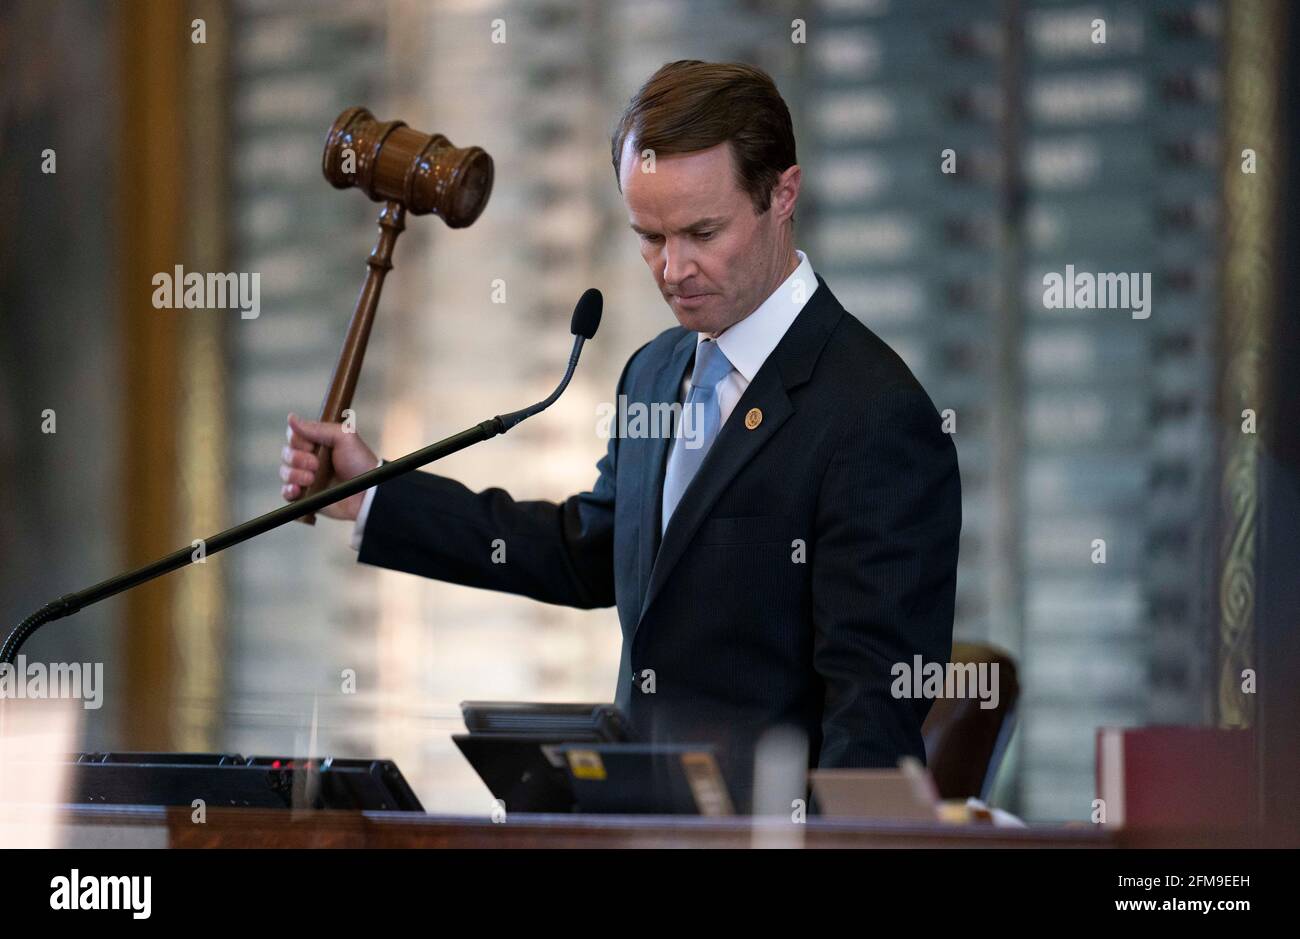 Austin, TX, USA. 6th May, 2021. The Texas House debating SB 7 late into the night a controversial omnibus elections bill that would make changes to the way Texas elections are held. House Speaker DADE PHELAN keeps order on the floor. Credit: Bob Daemmrich/ZUMA Wire/Alamy Live News Stock Photo